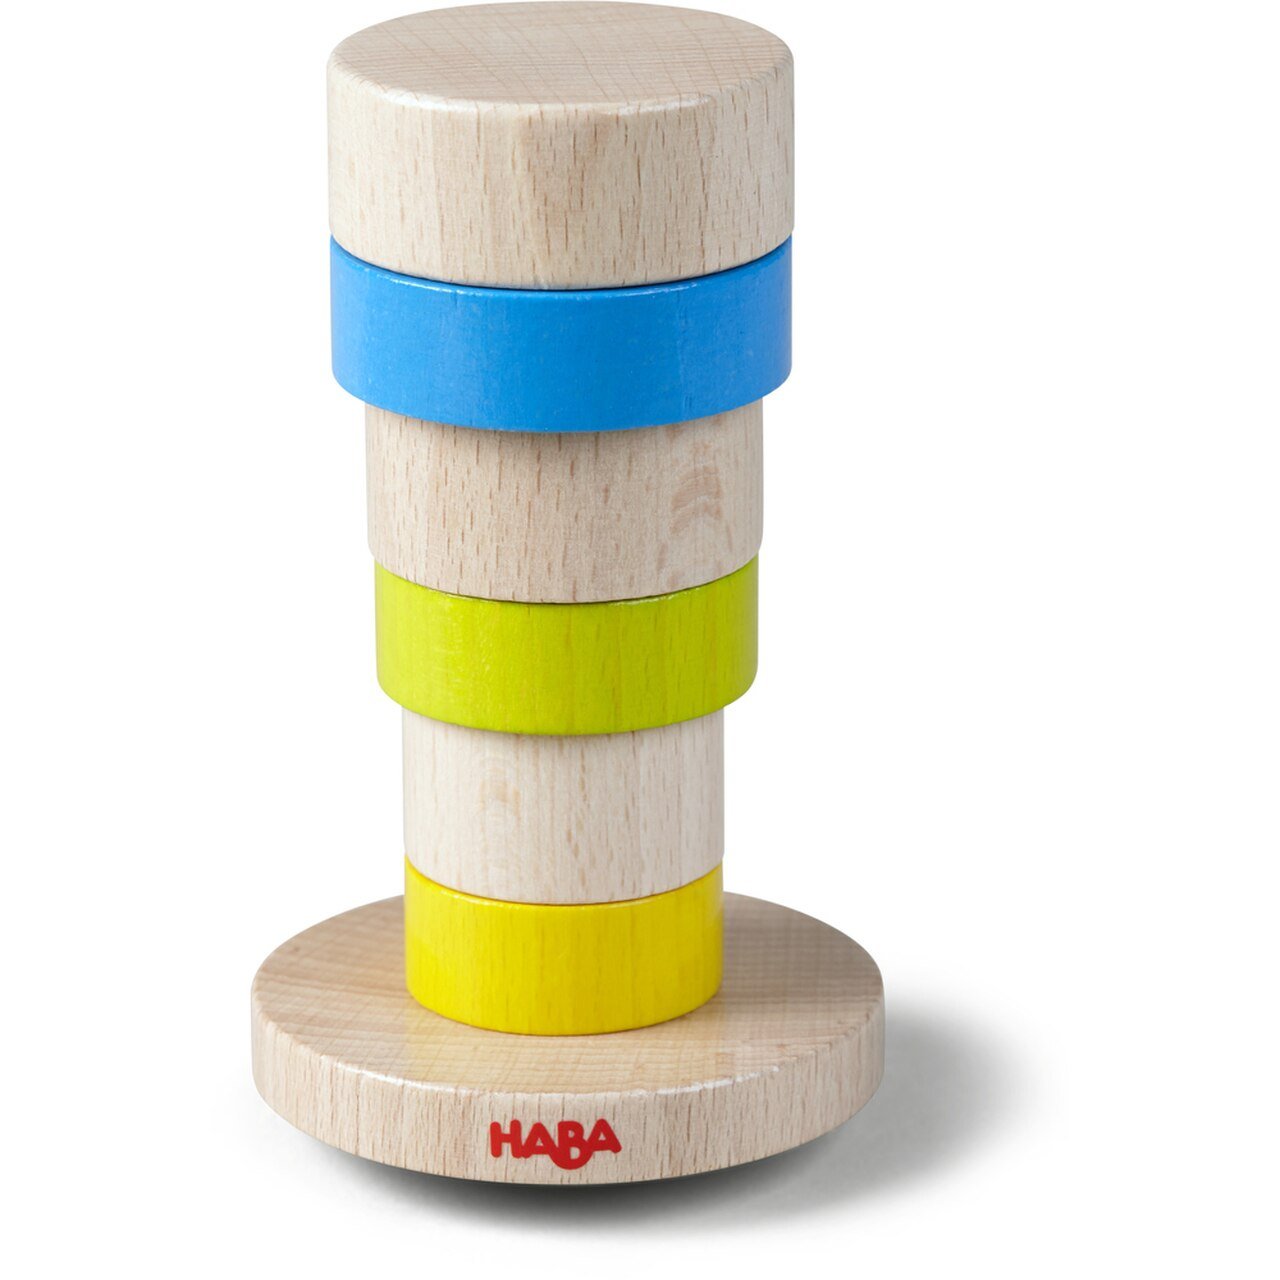 HABA Wobbly Tower Stacking Game - Wood Wood Toys Canada's Favourite Montessori Toy Store